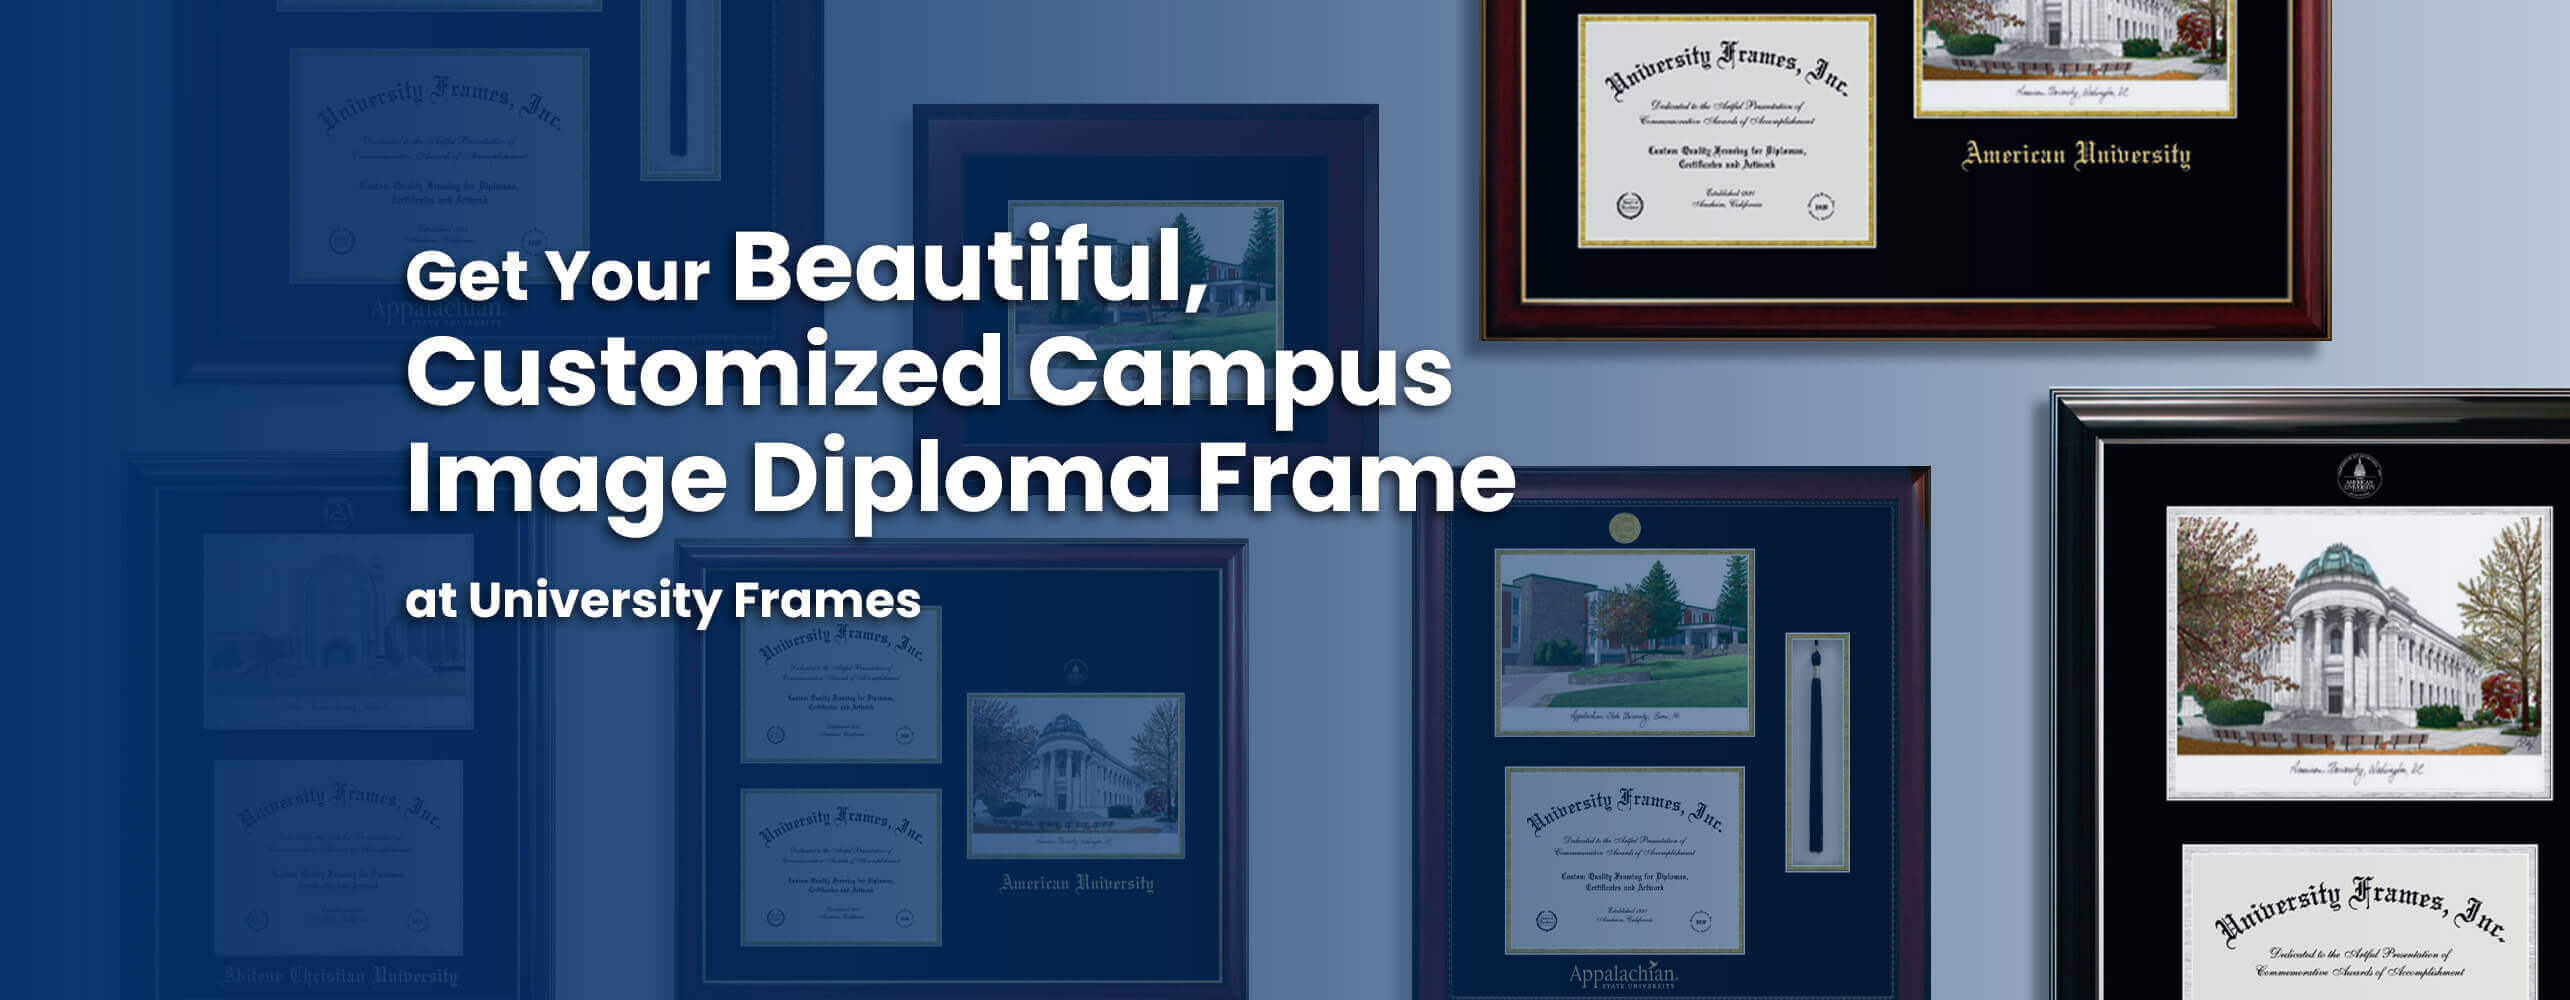 Get Your Beautiful, Customized Campus Image Diploma Frame at University Frames